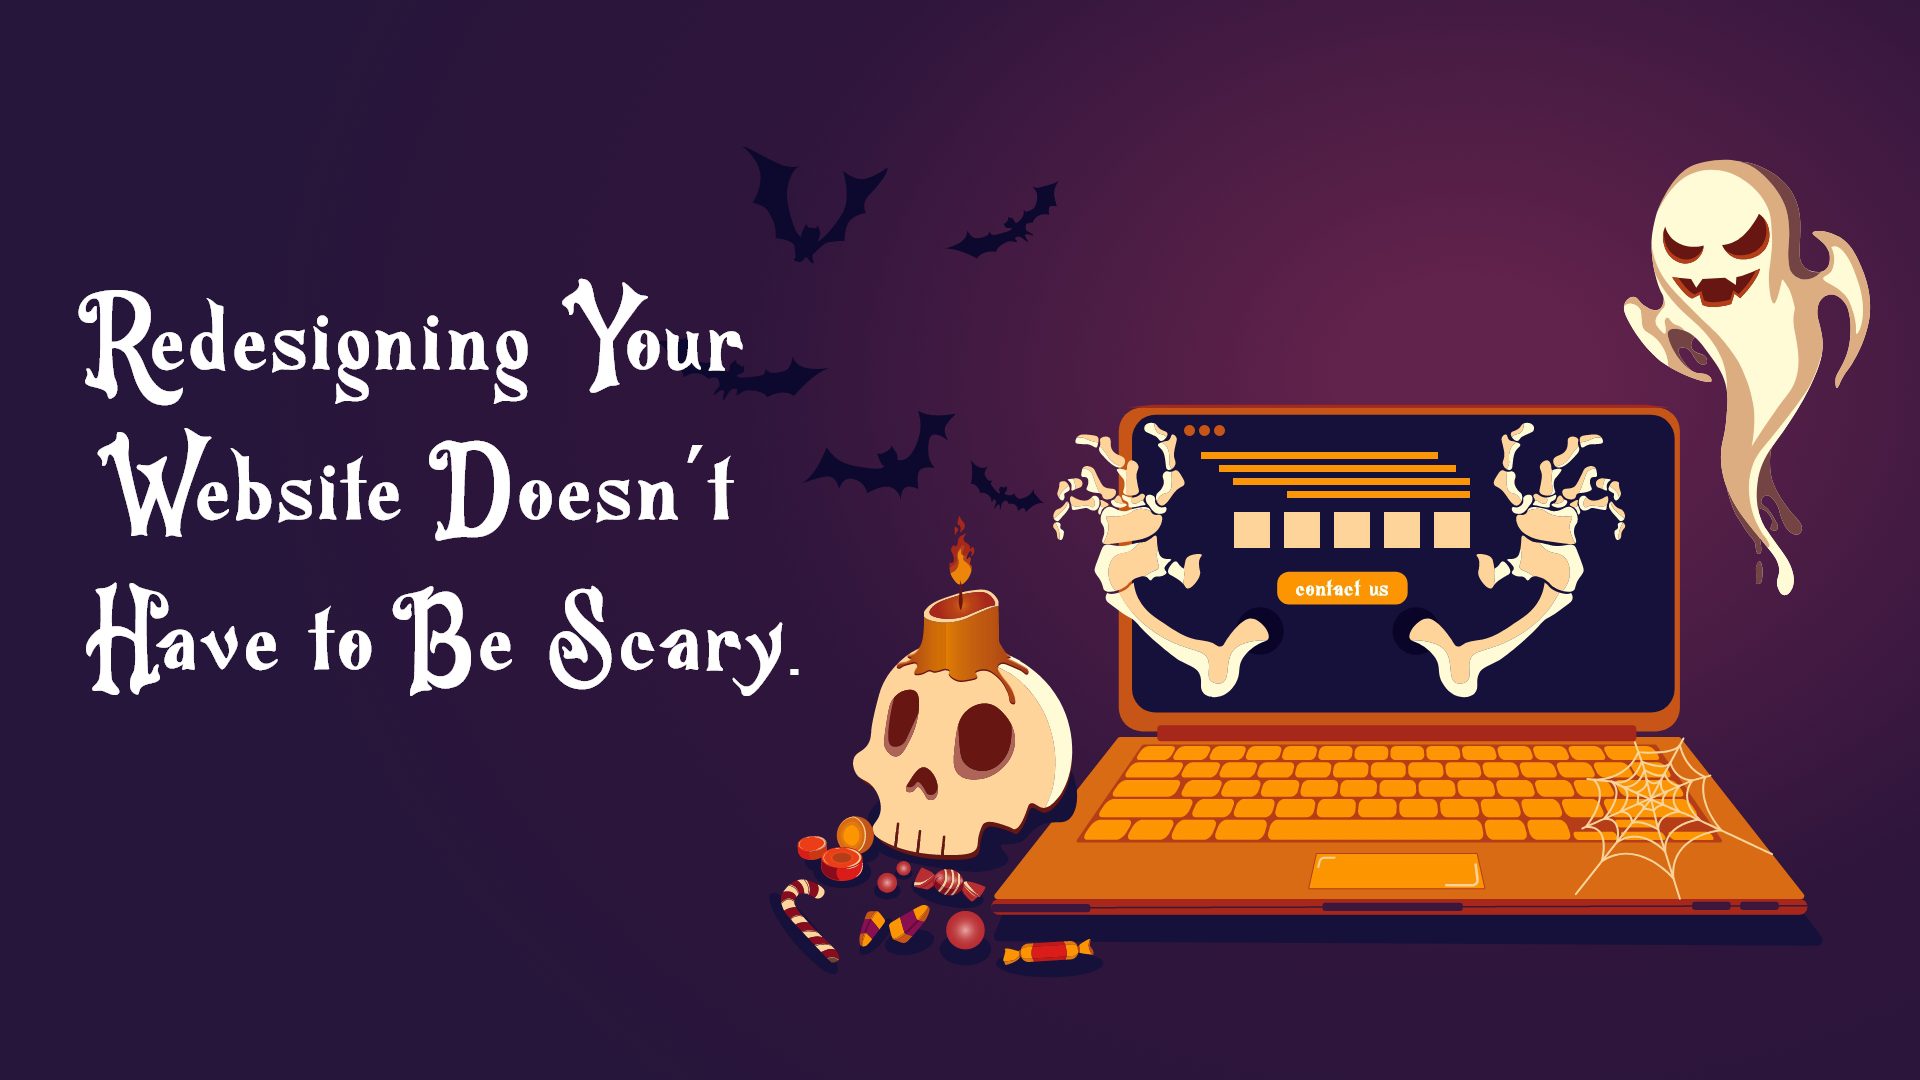 Redesigning Your Website Doesn't Have to Be Scary